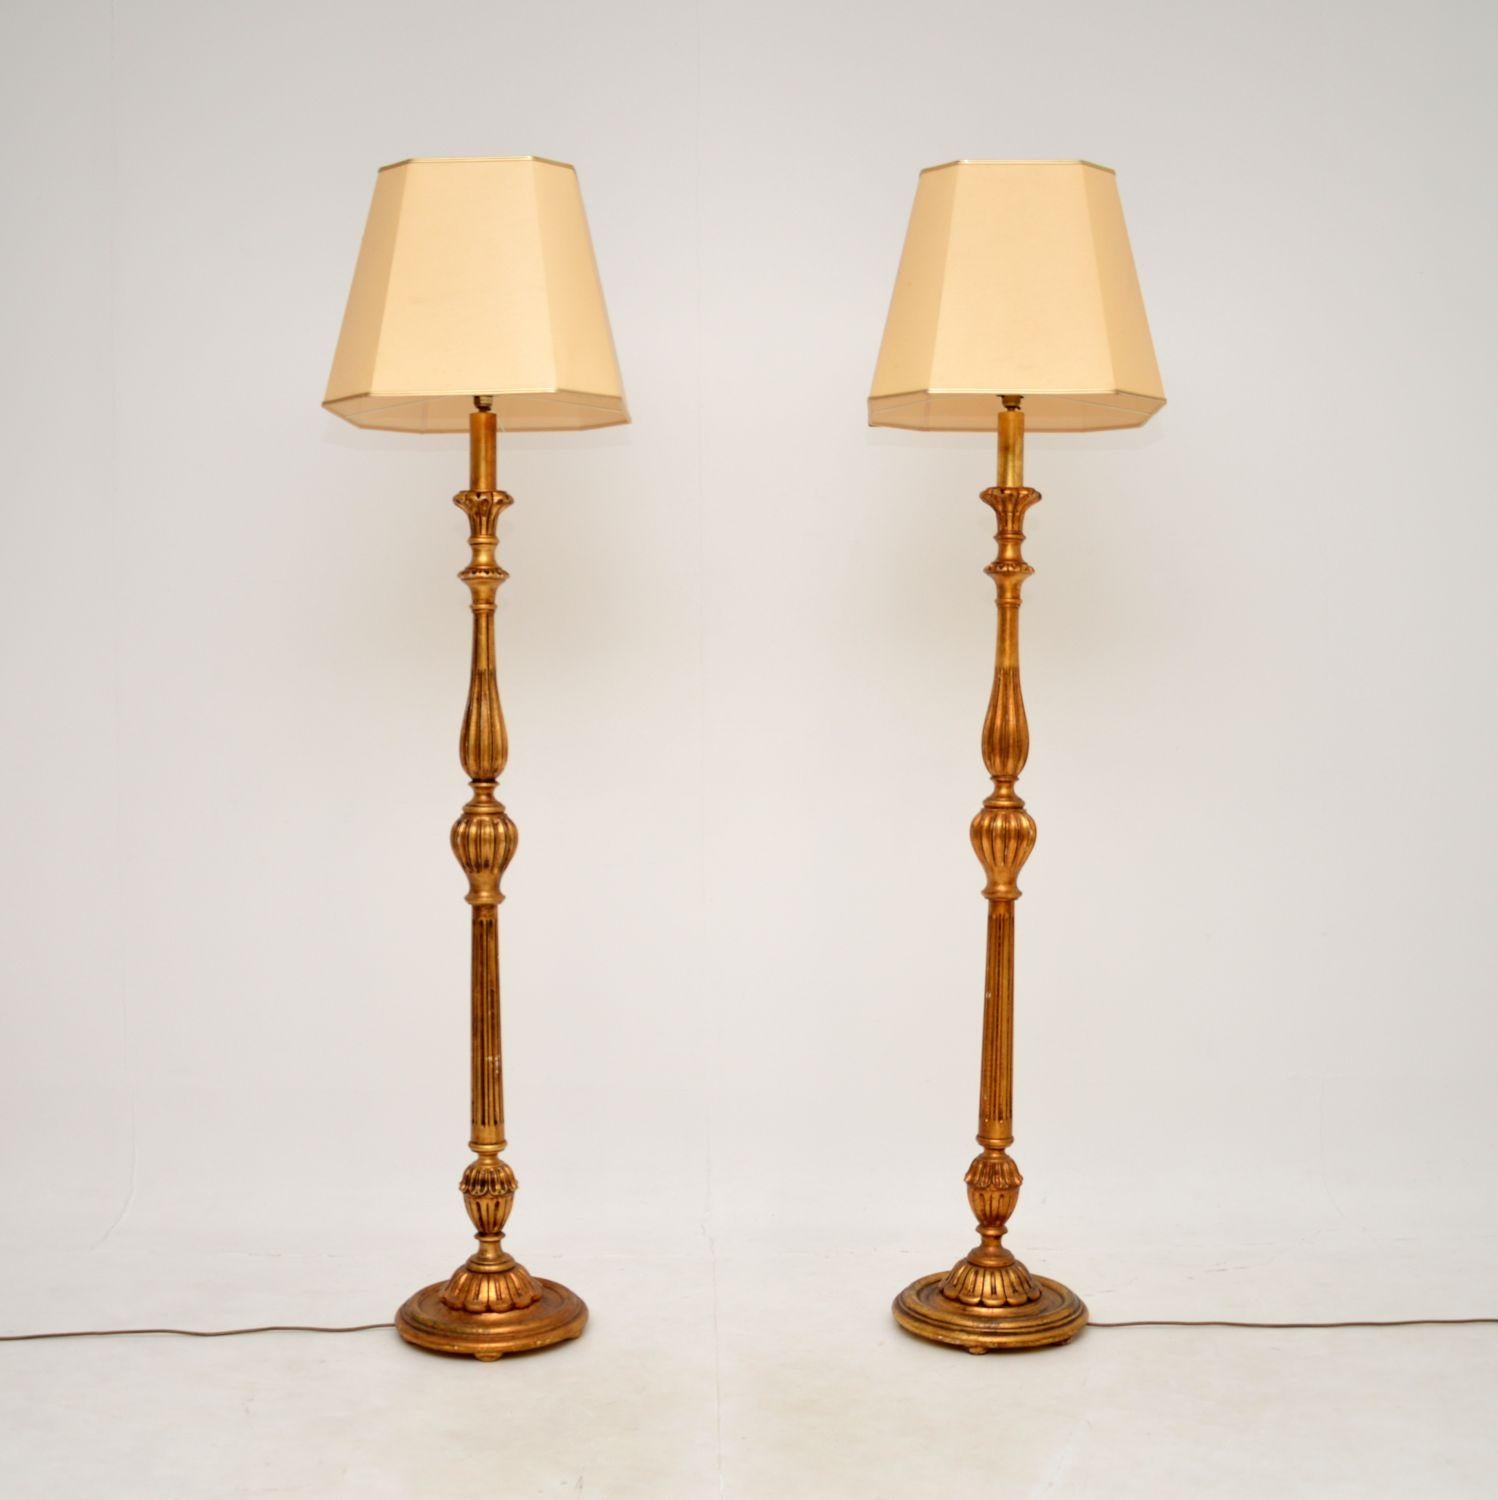 A stunning and very impressive pair of antique French style gilt wood floor lamps. They were made in France, they date from around the 1950’s.

The quality is superb, they are beautifully made with very fine details. The gilt wood finish has a